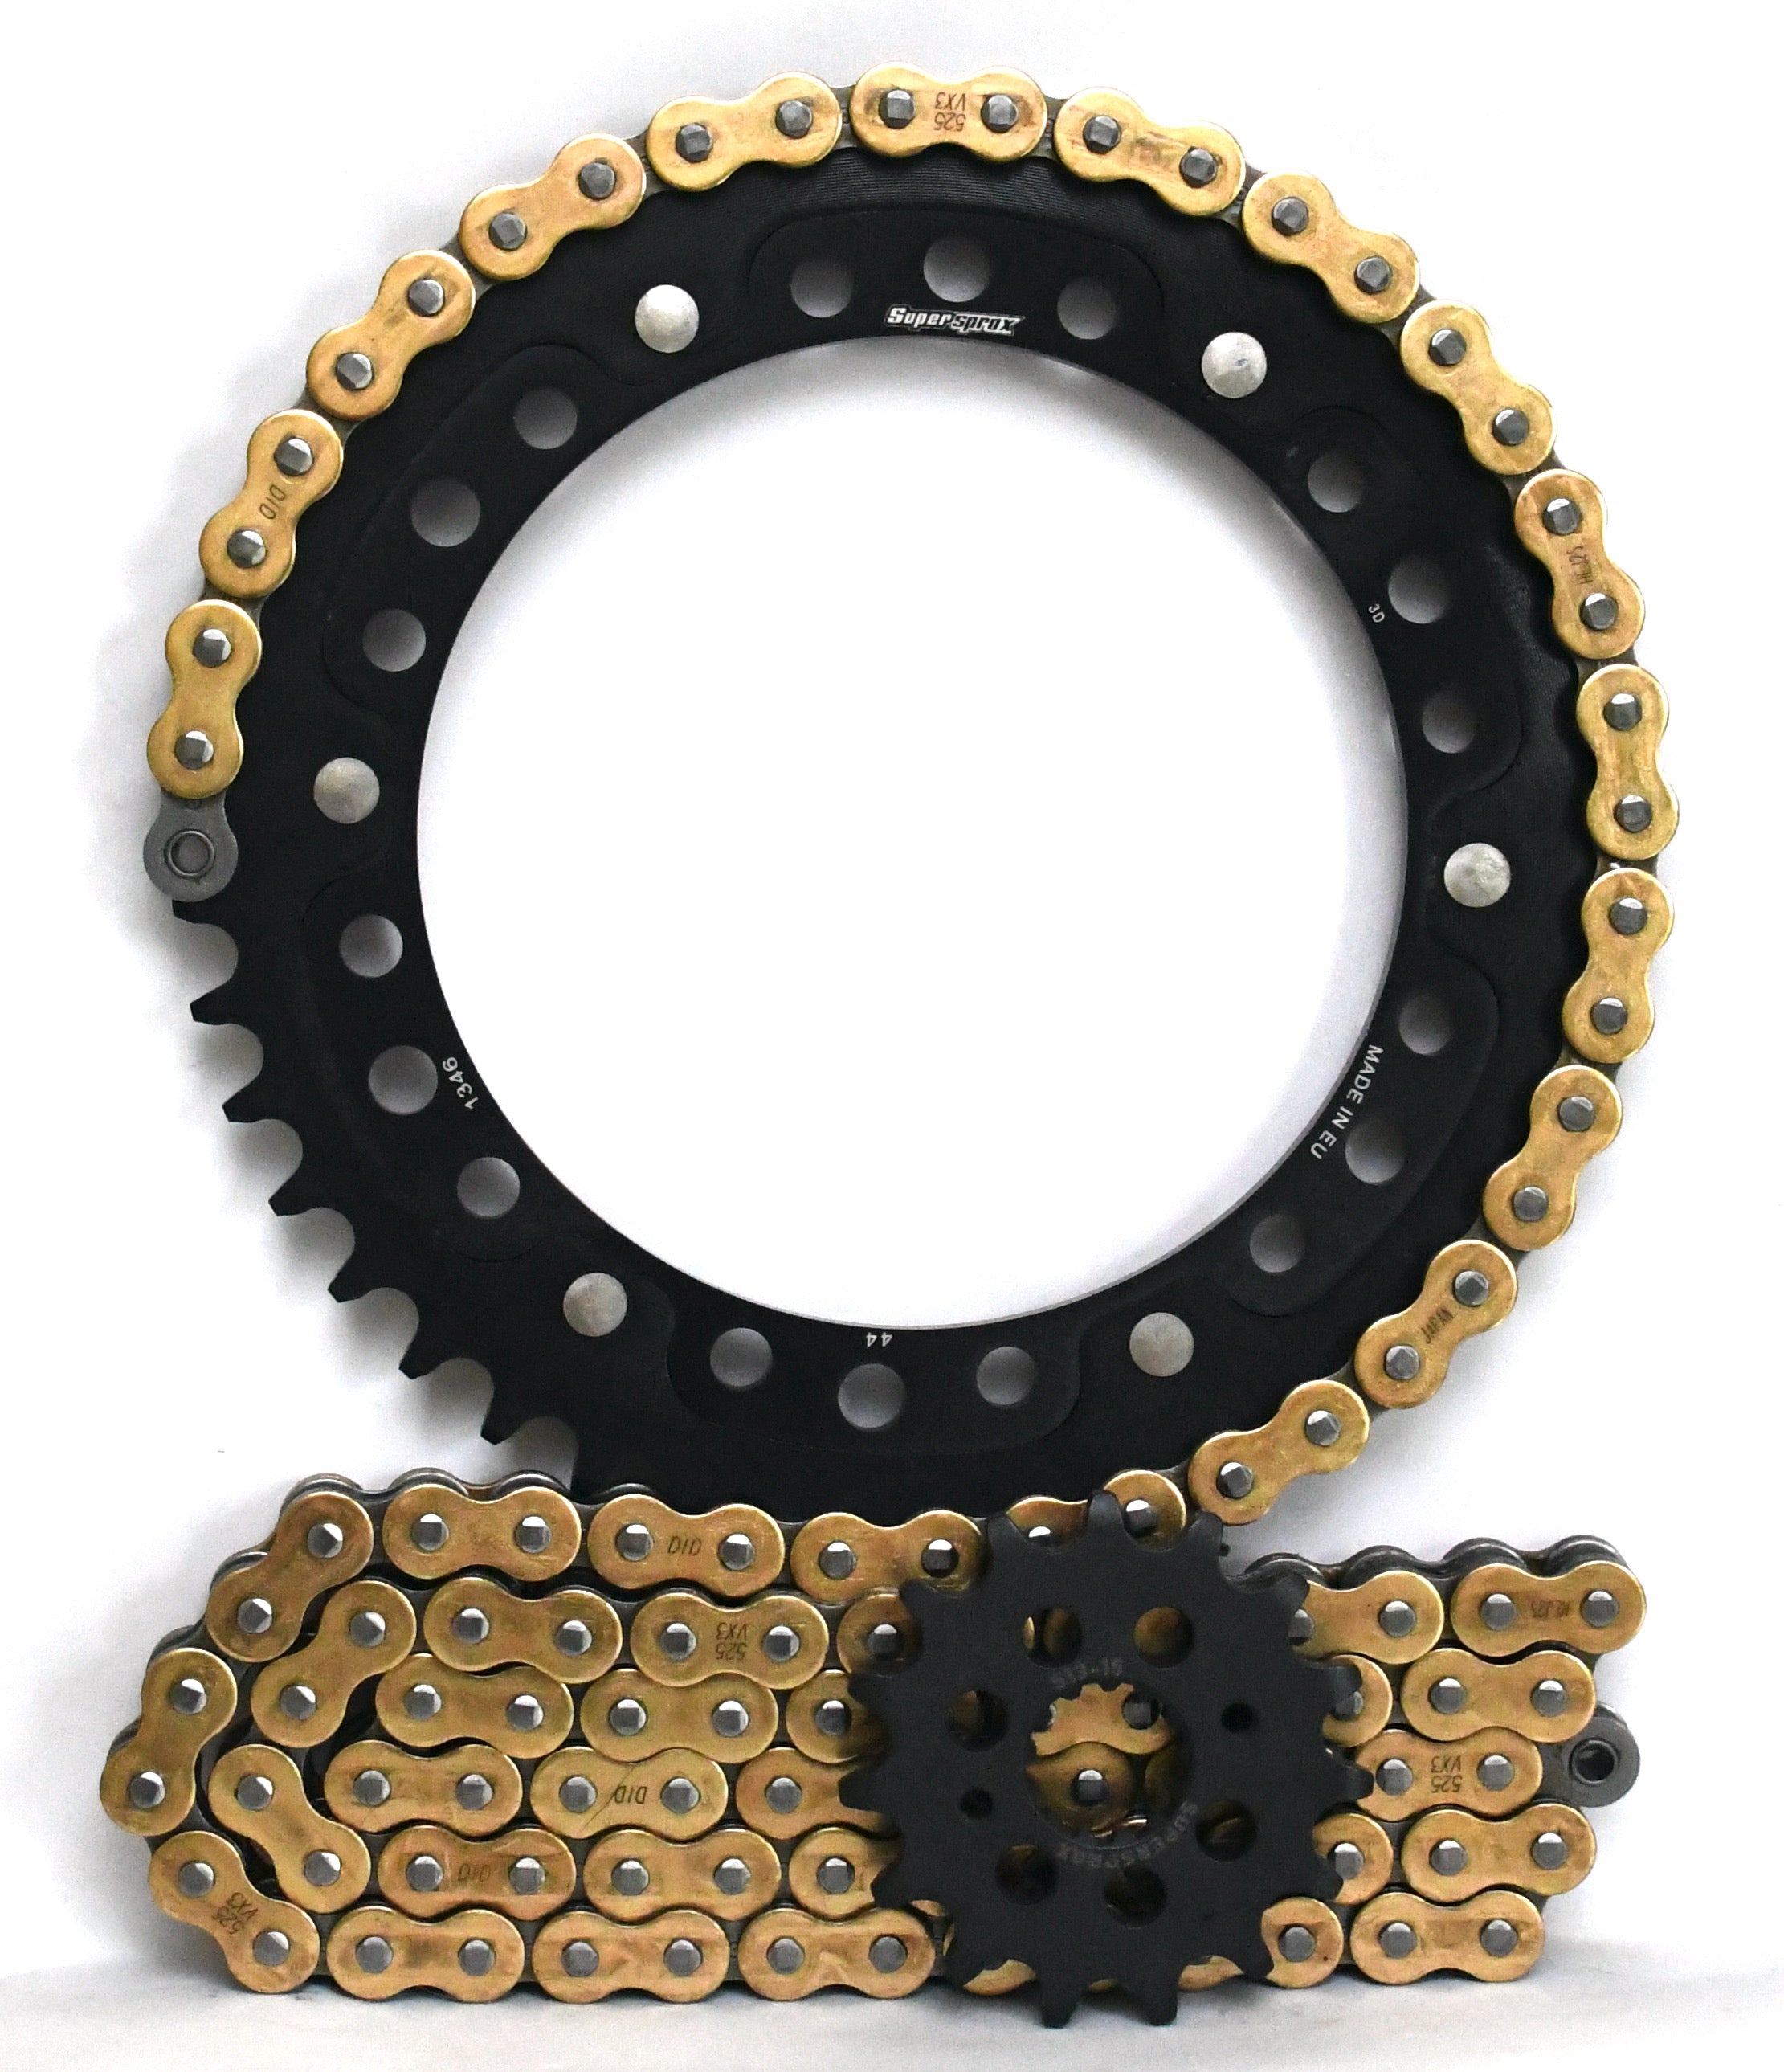 Supersprox Chain & Sprocket Kit for Honda CB1000R 2018> - Standard Gearing